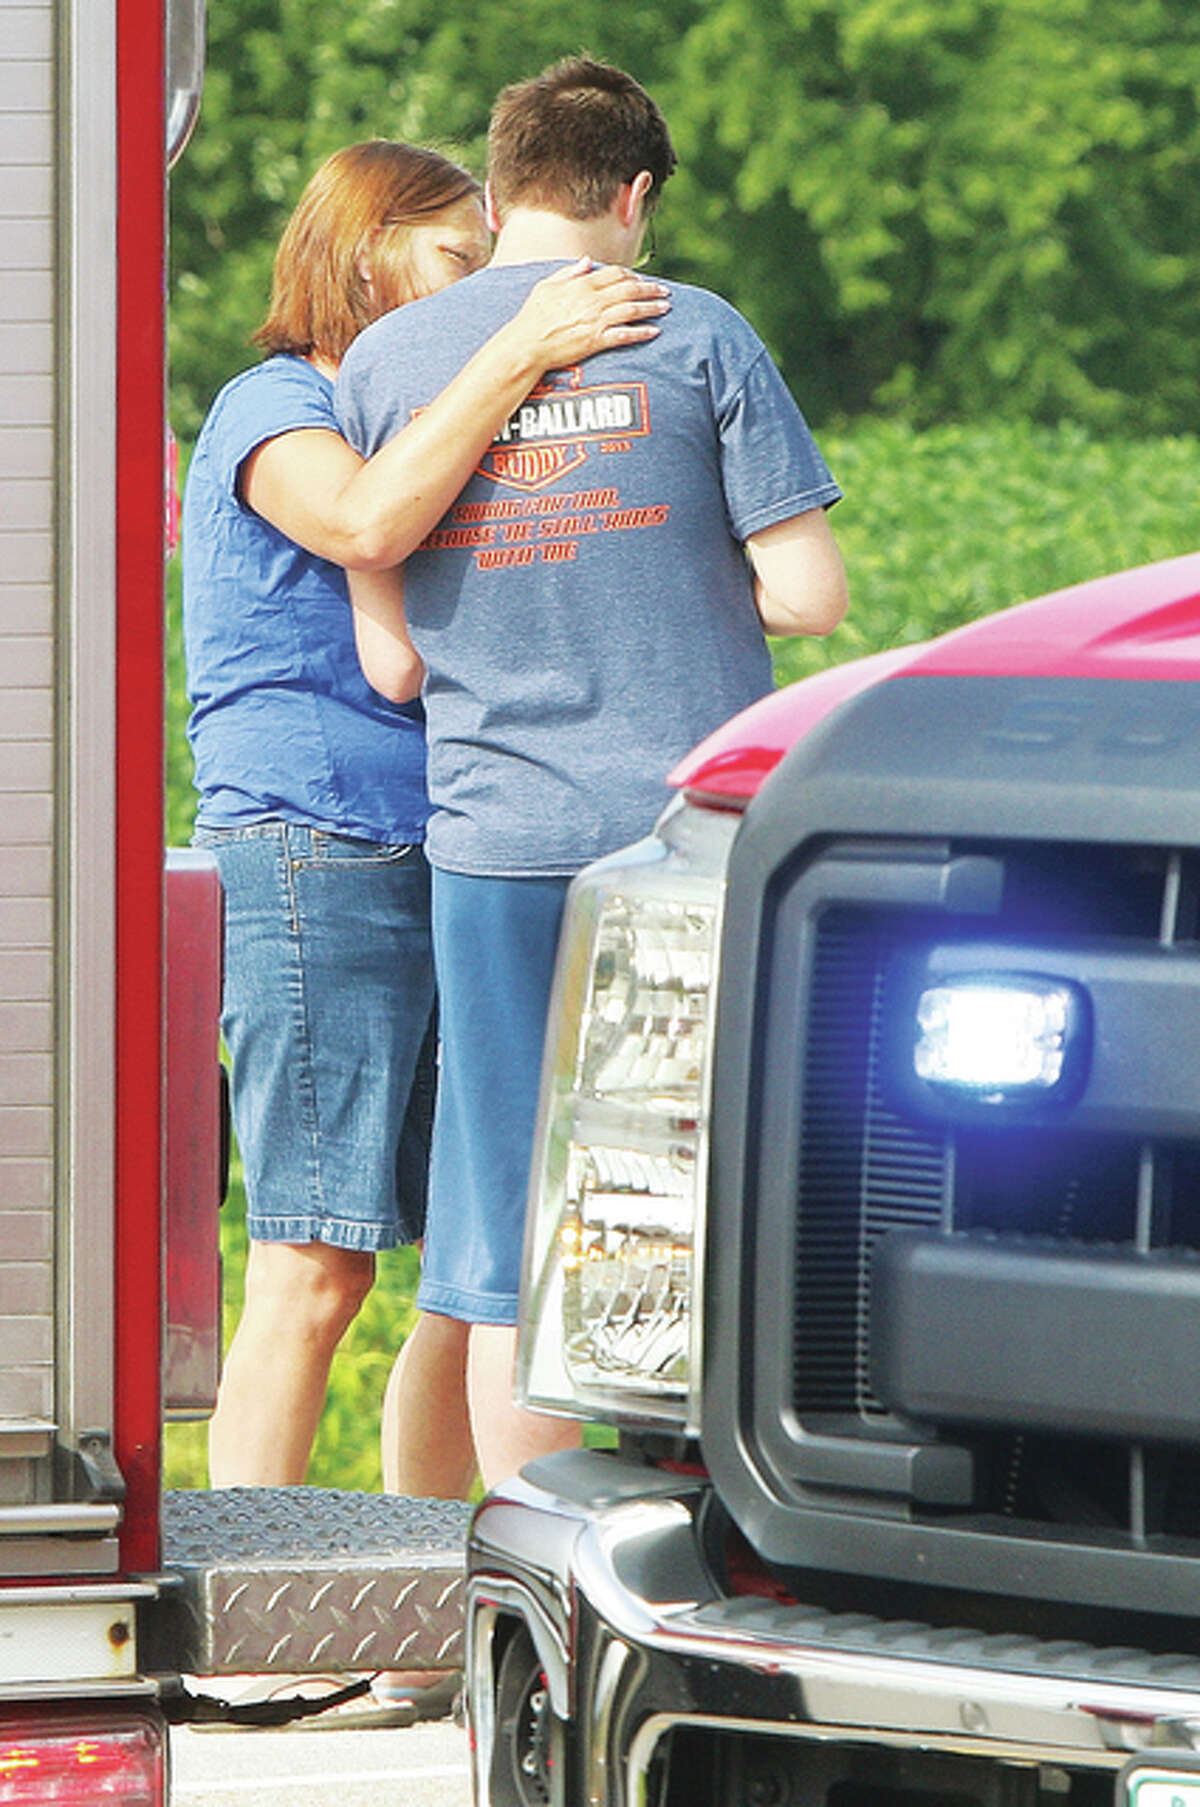 A woman tries to comfort the driver who struck and killed a pedestrian Monday on Illinois Route 140 east of Powder Mill Road in Alton. The driver was composed but distraught after the crash.